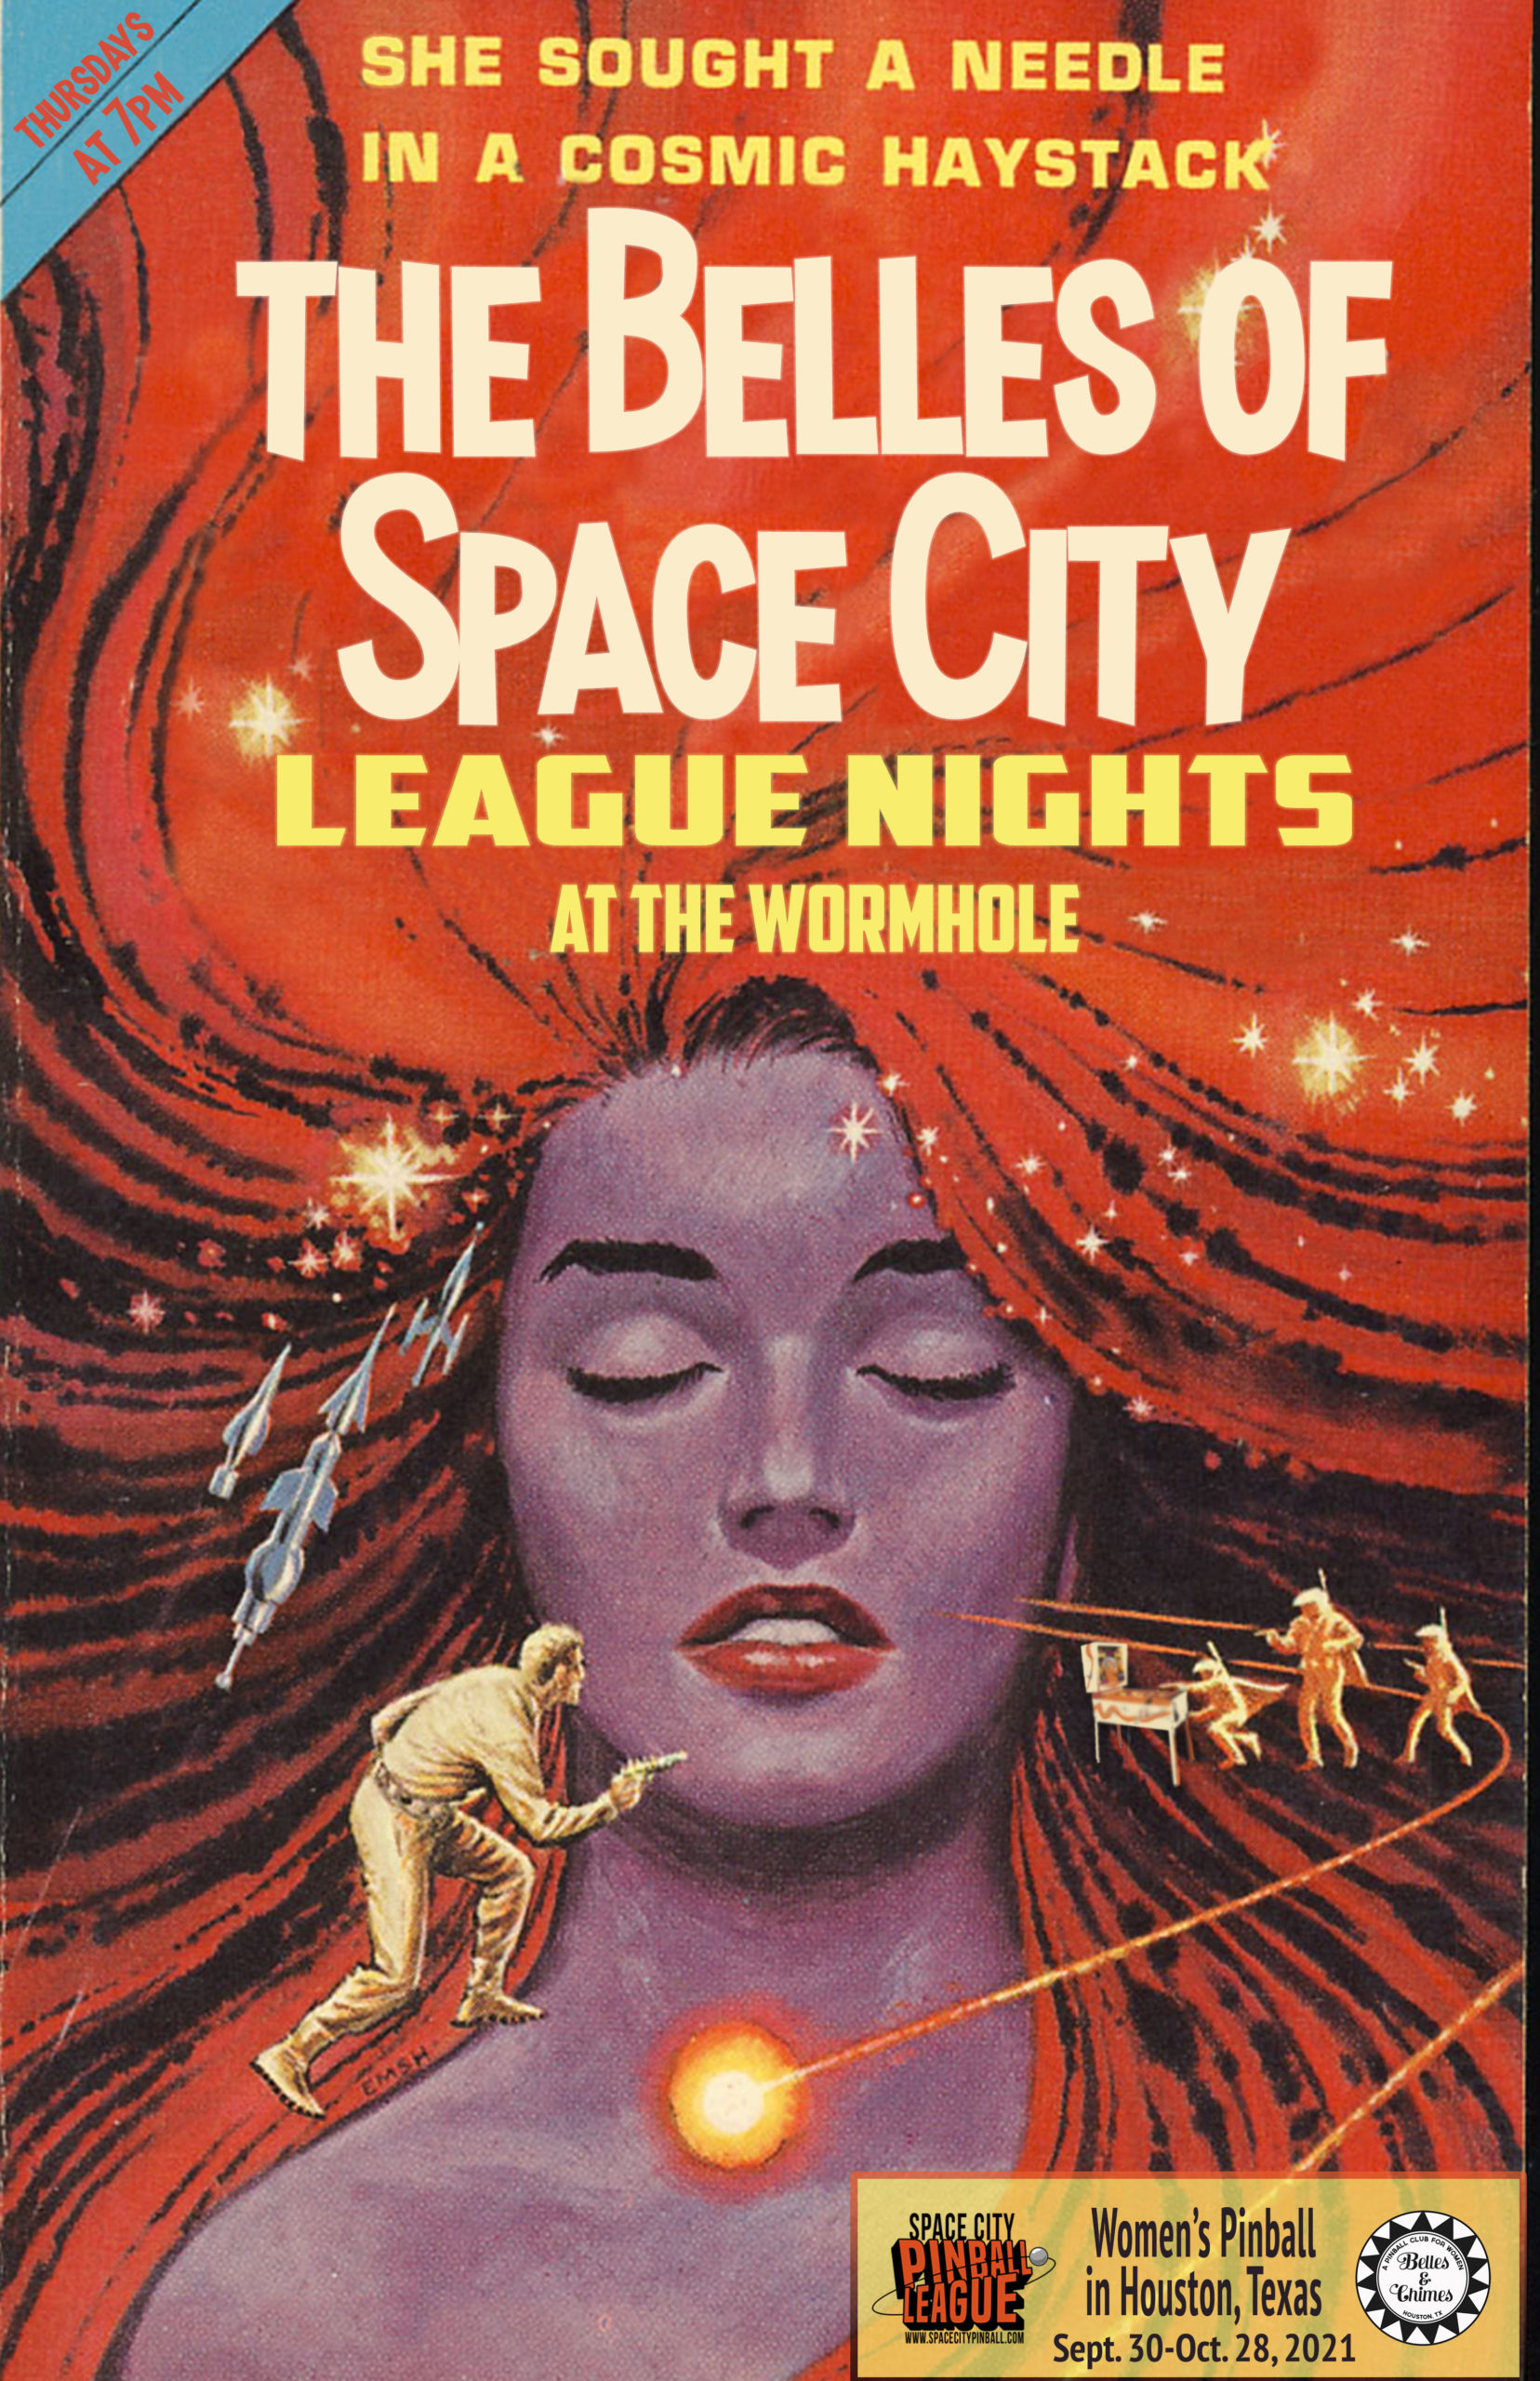 Inside The Wormhole: check out the Space City Pinball League